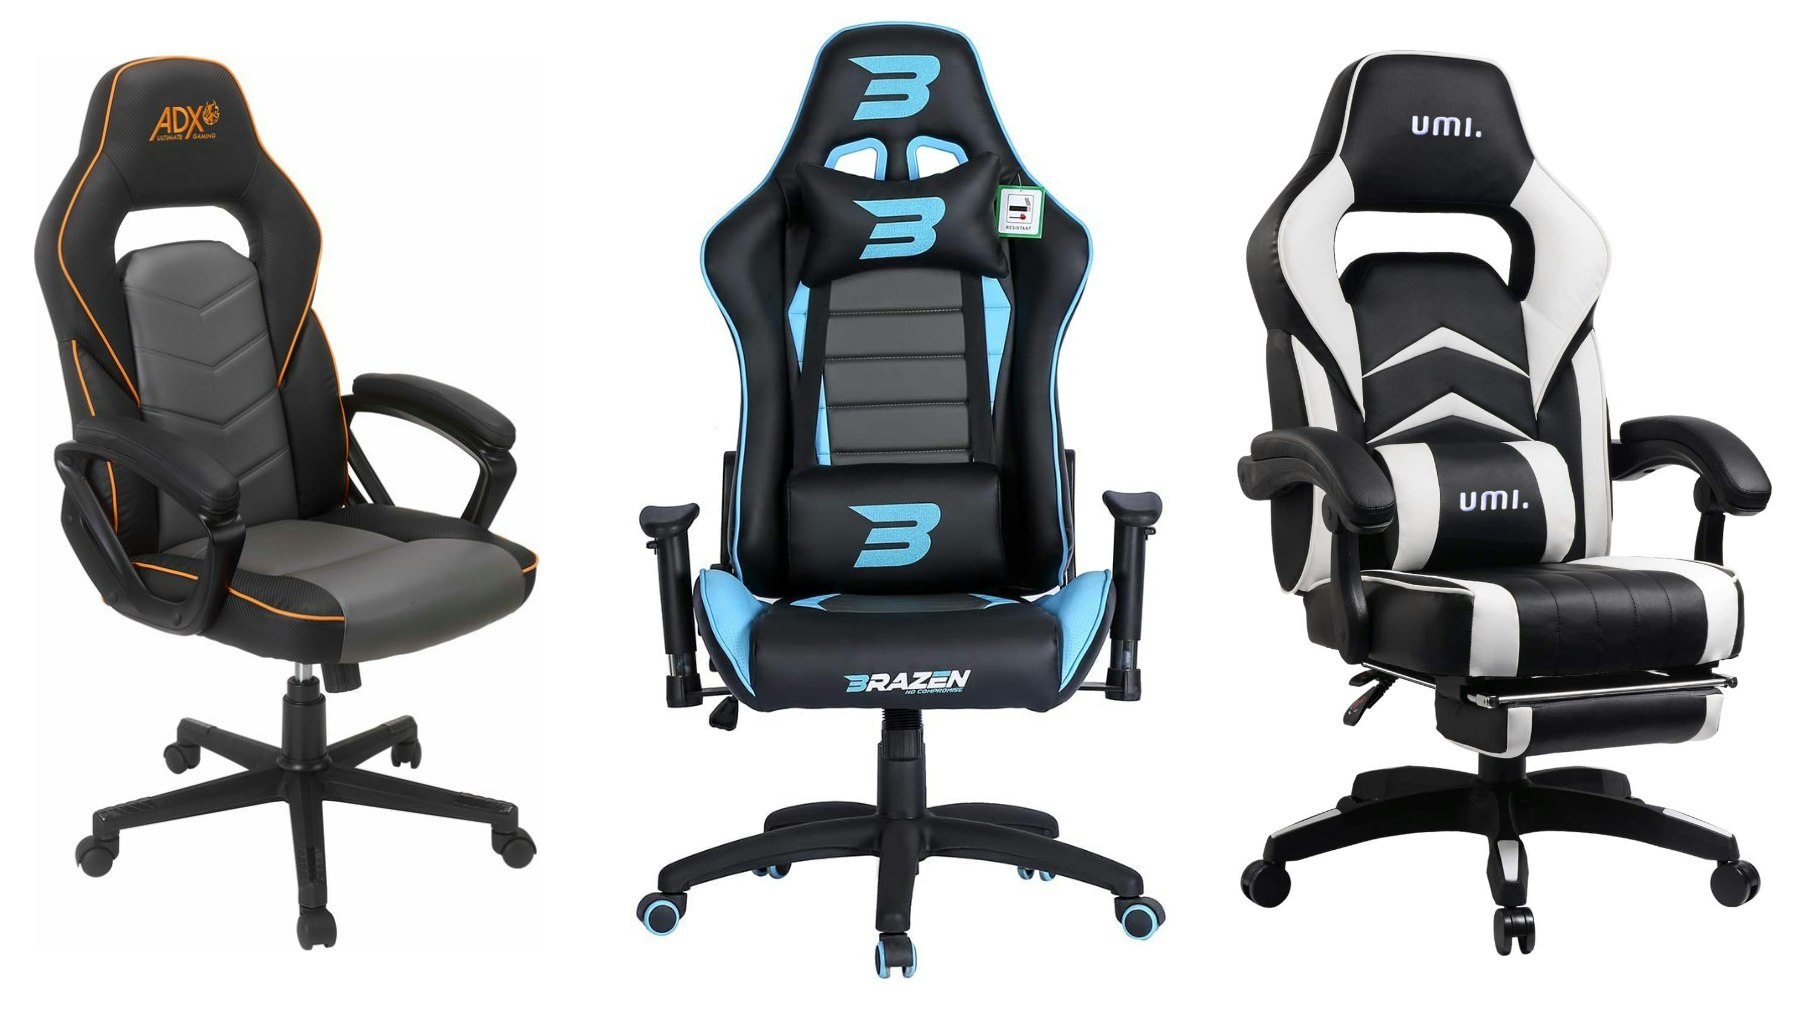 The Top 4 Xbox One Gaming Chairs to Buy in 2018